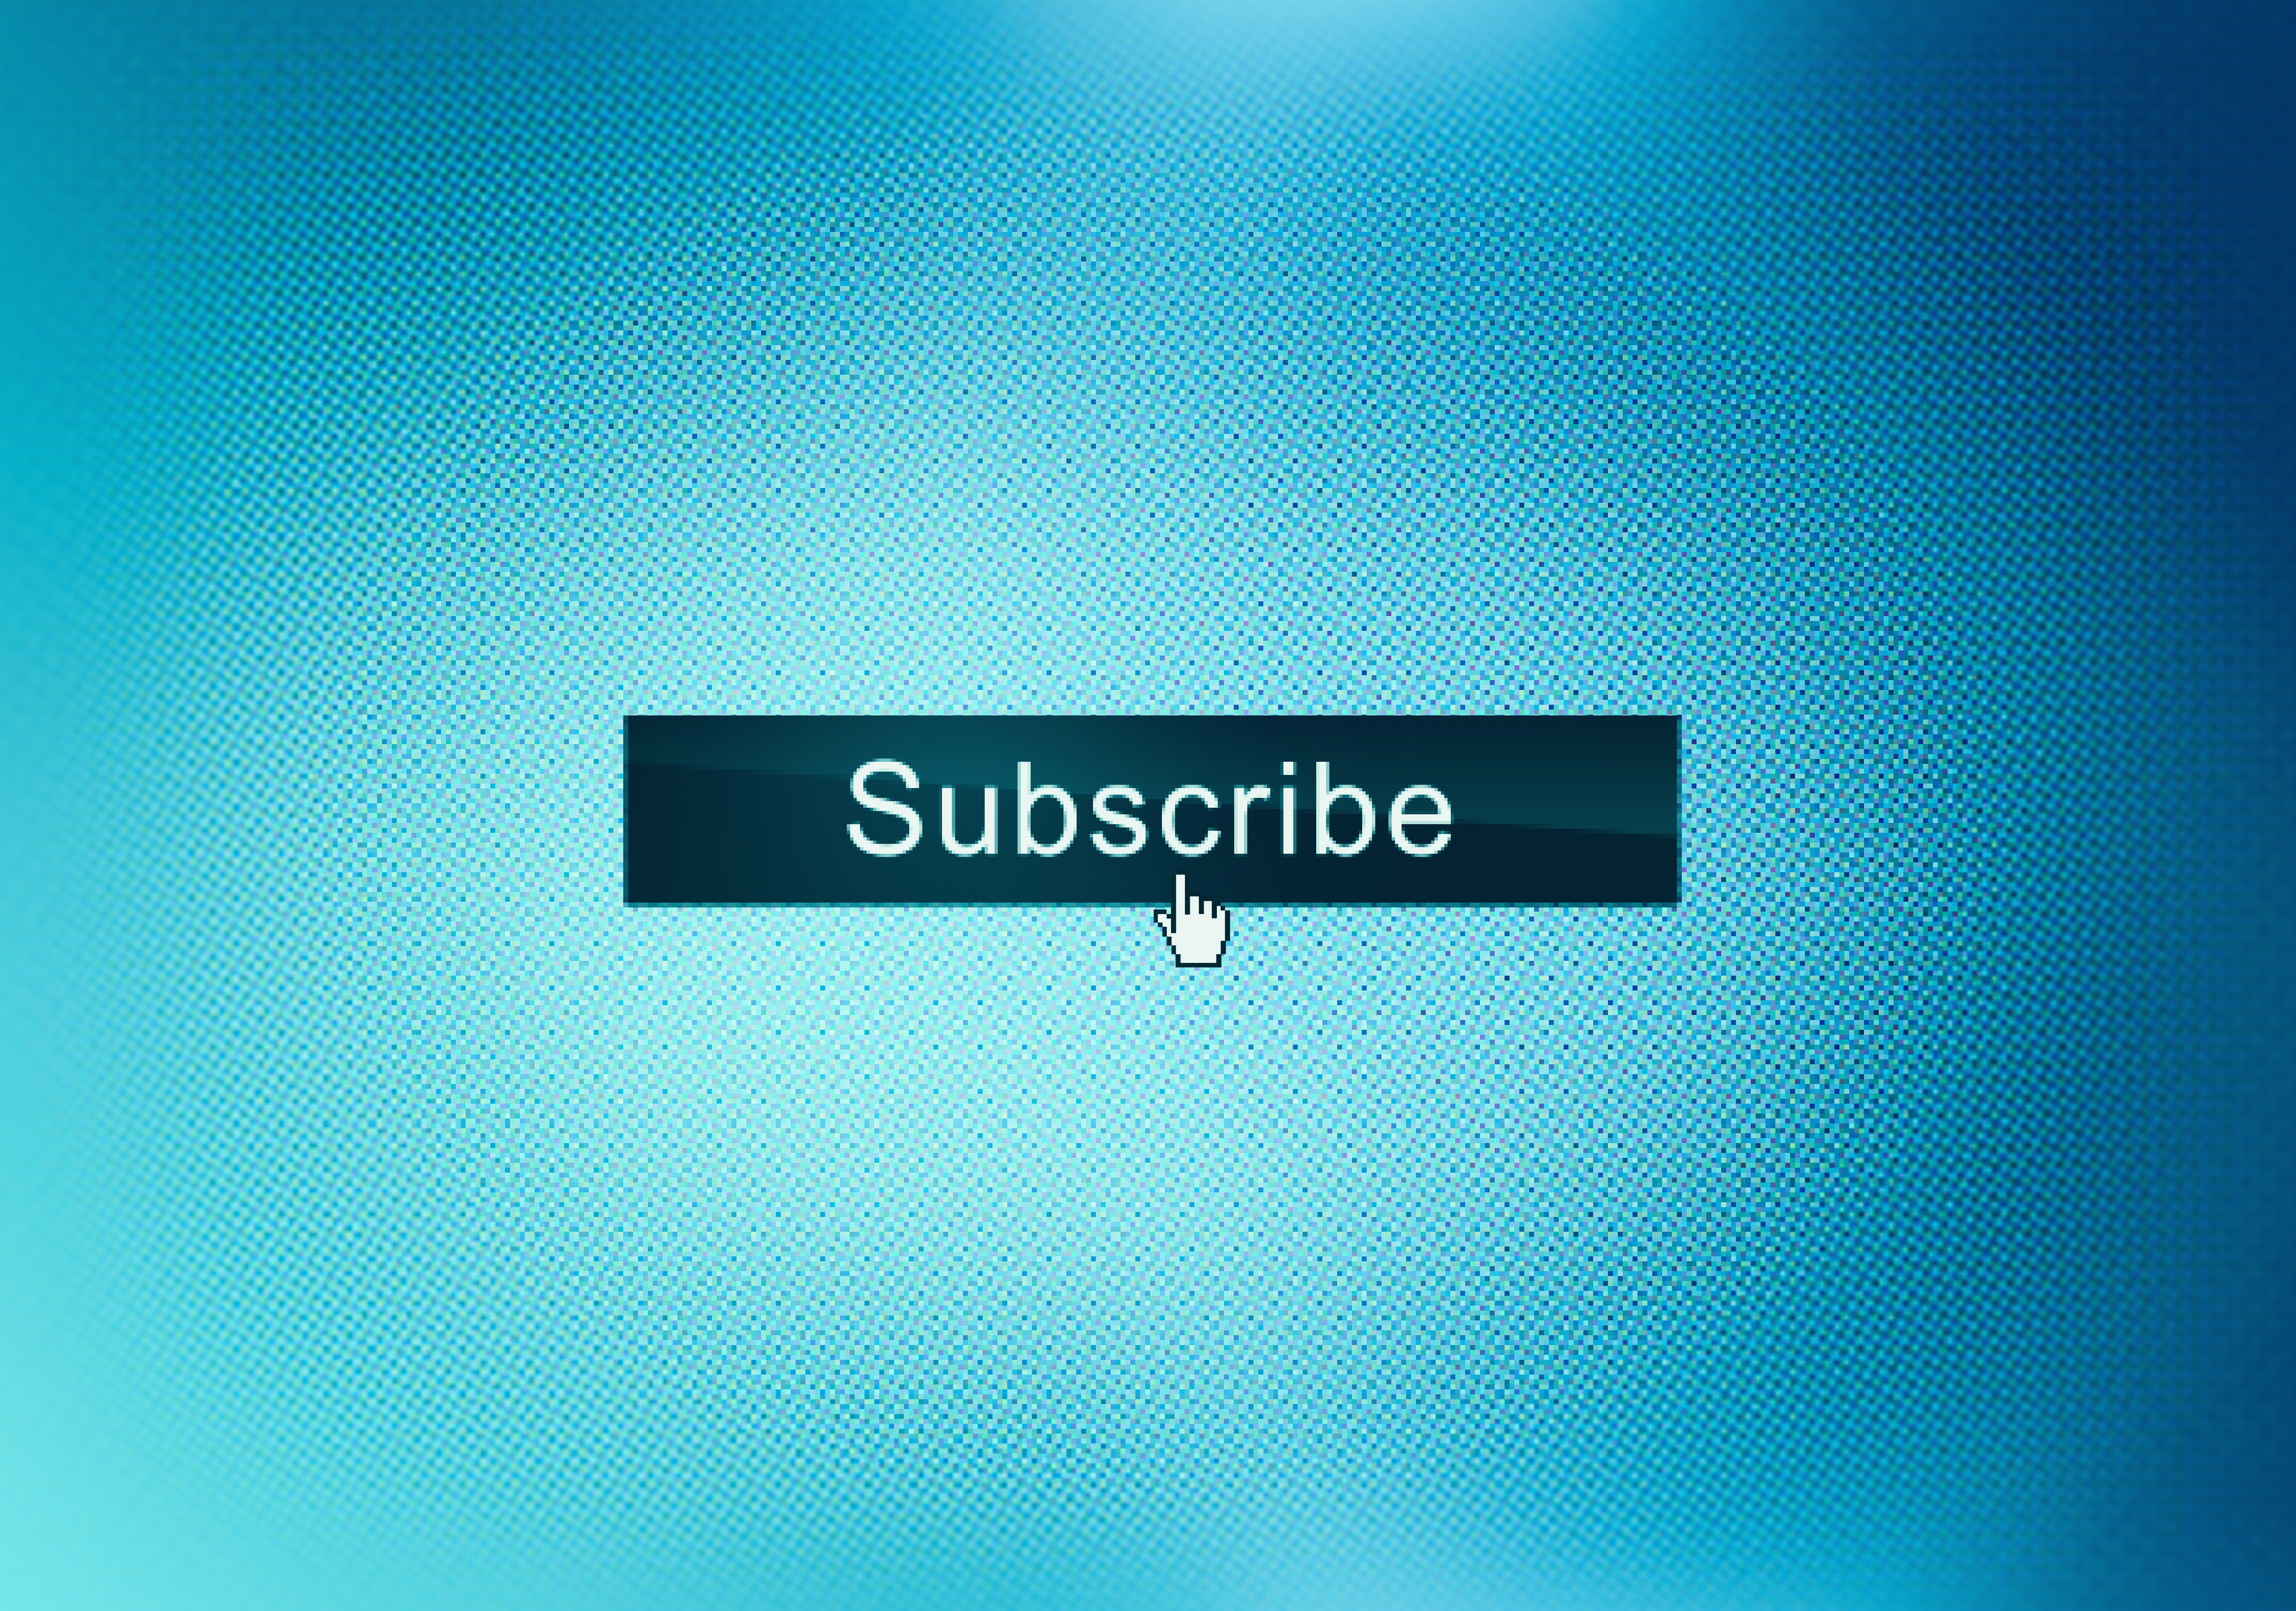 Graphic with &#x27;Subscribe&#x27; button and cursor icon indicating a call to action for online subscription